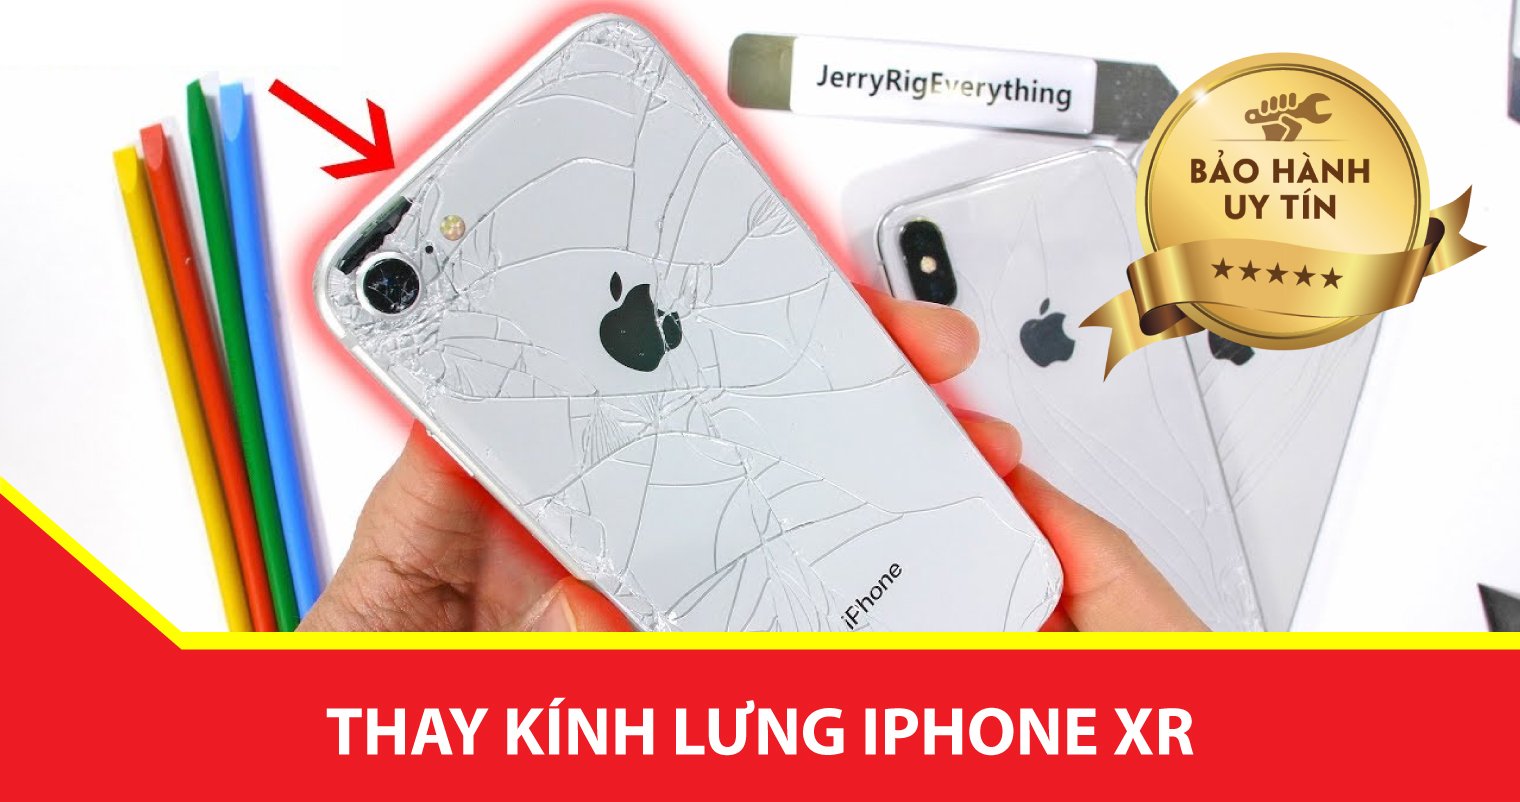 thay kinh lung iphone xr chinh hang Ha Noi